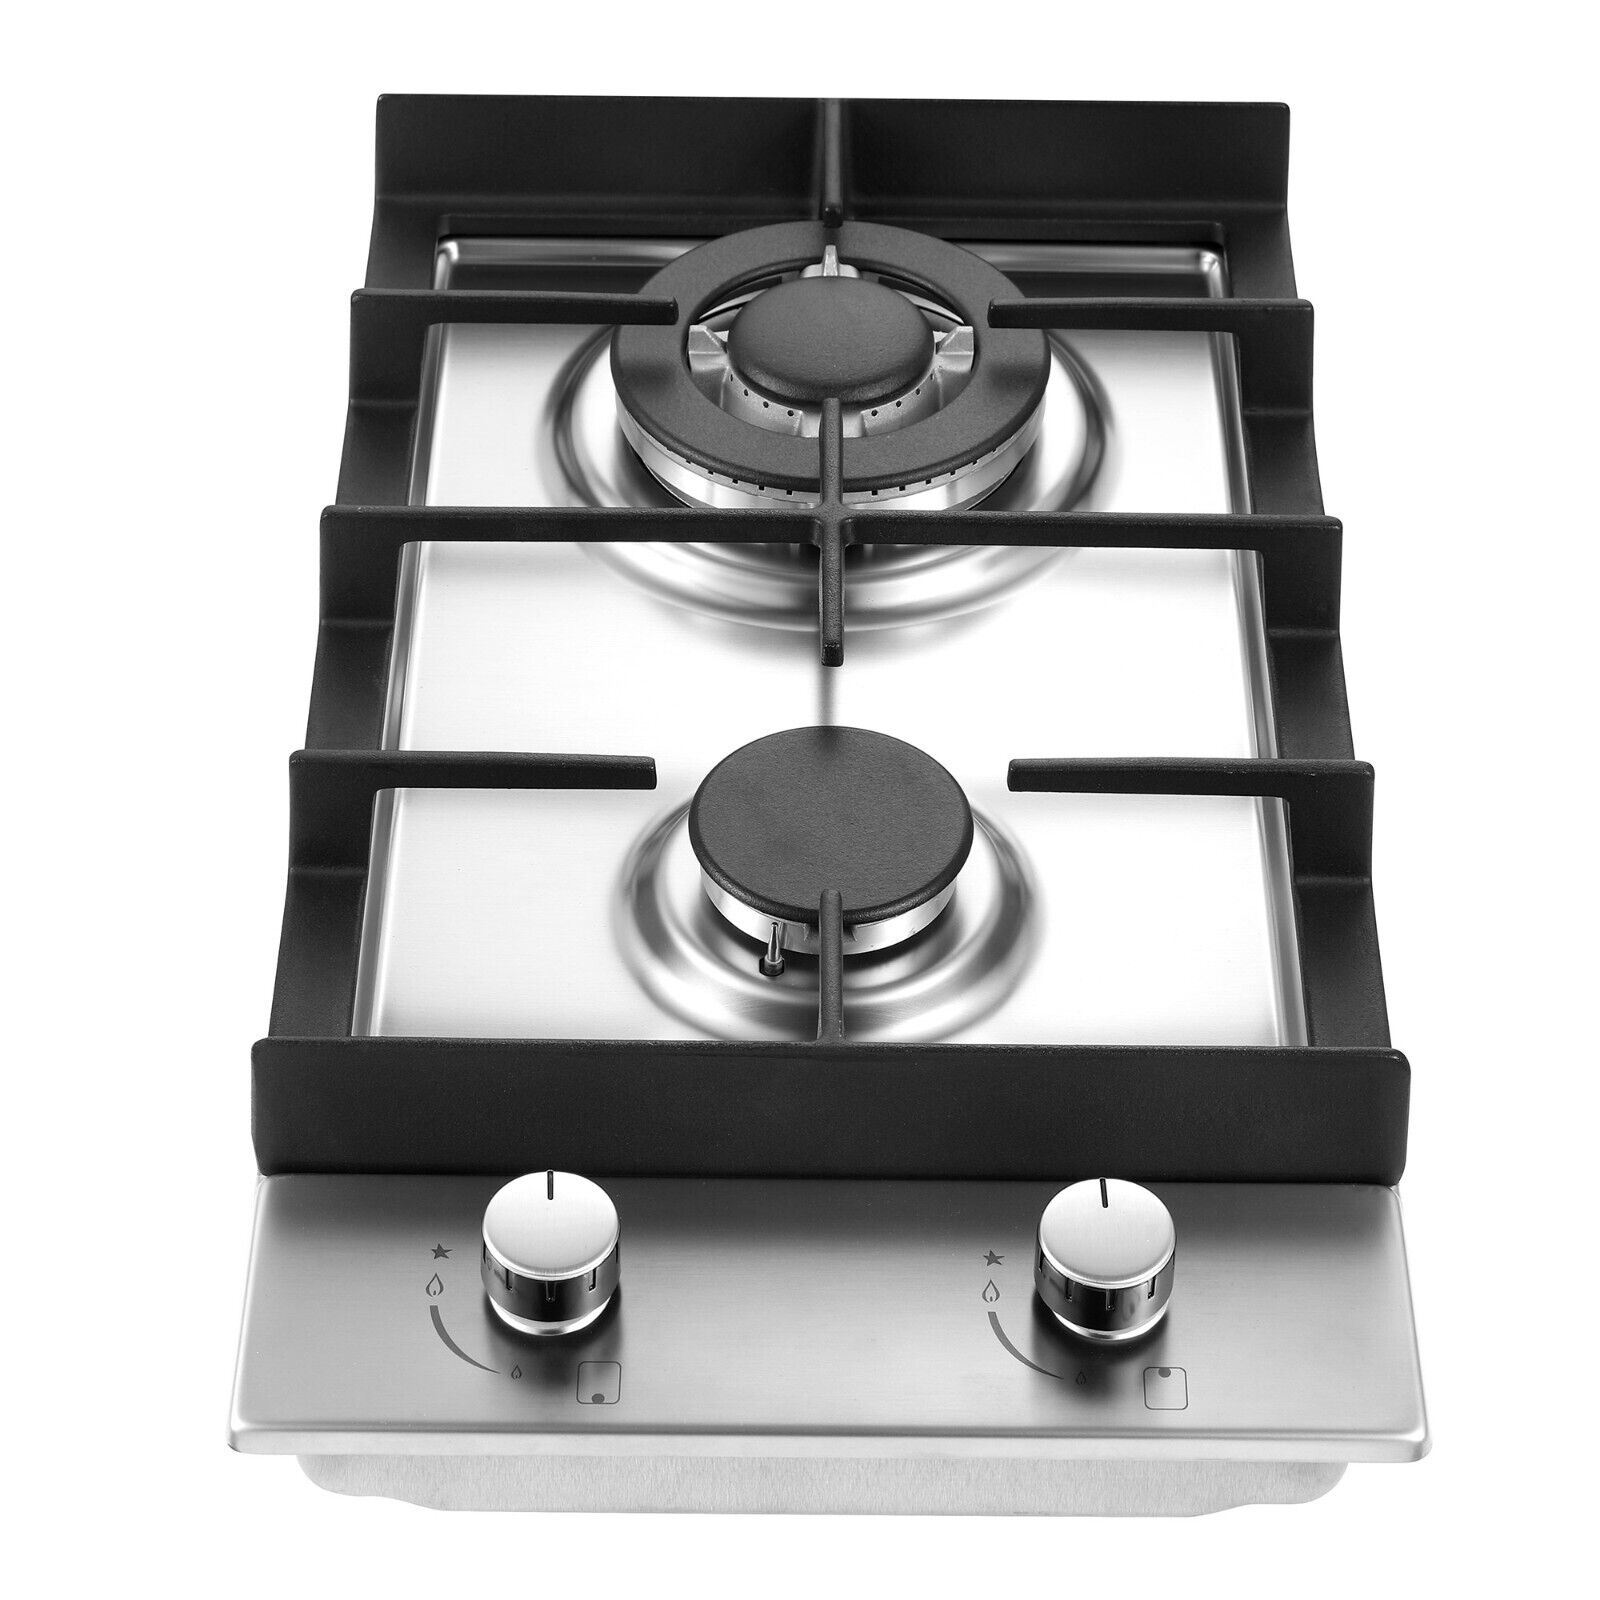 Propane Gas Cooktop 2 Burner Gas Stove Portable Stainless Steel Stove Auto  Ignition Camping Dual LPG for RV, Apartment, Outdoor